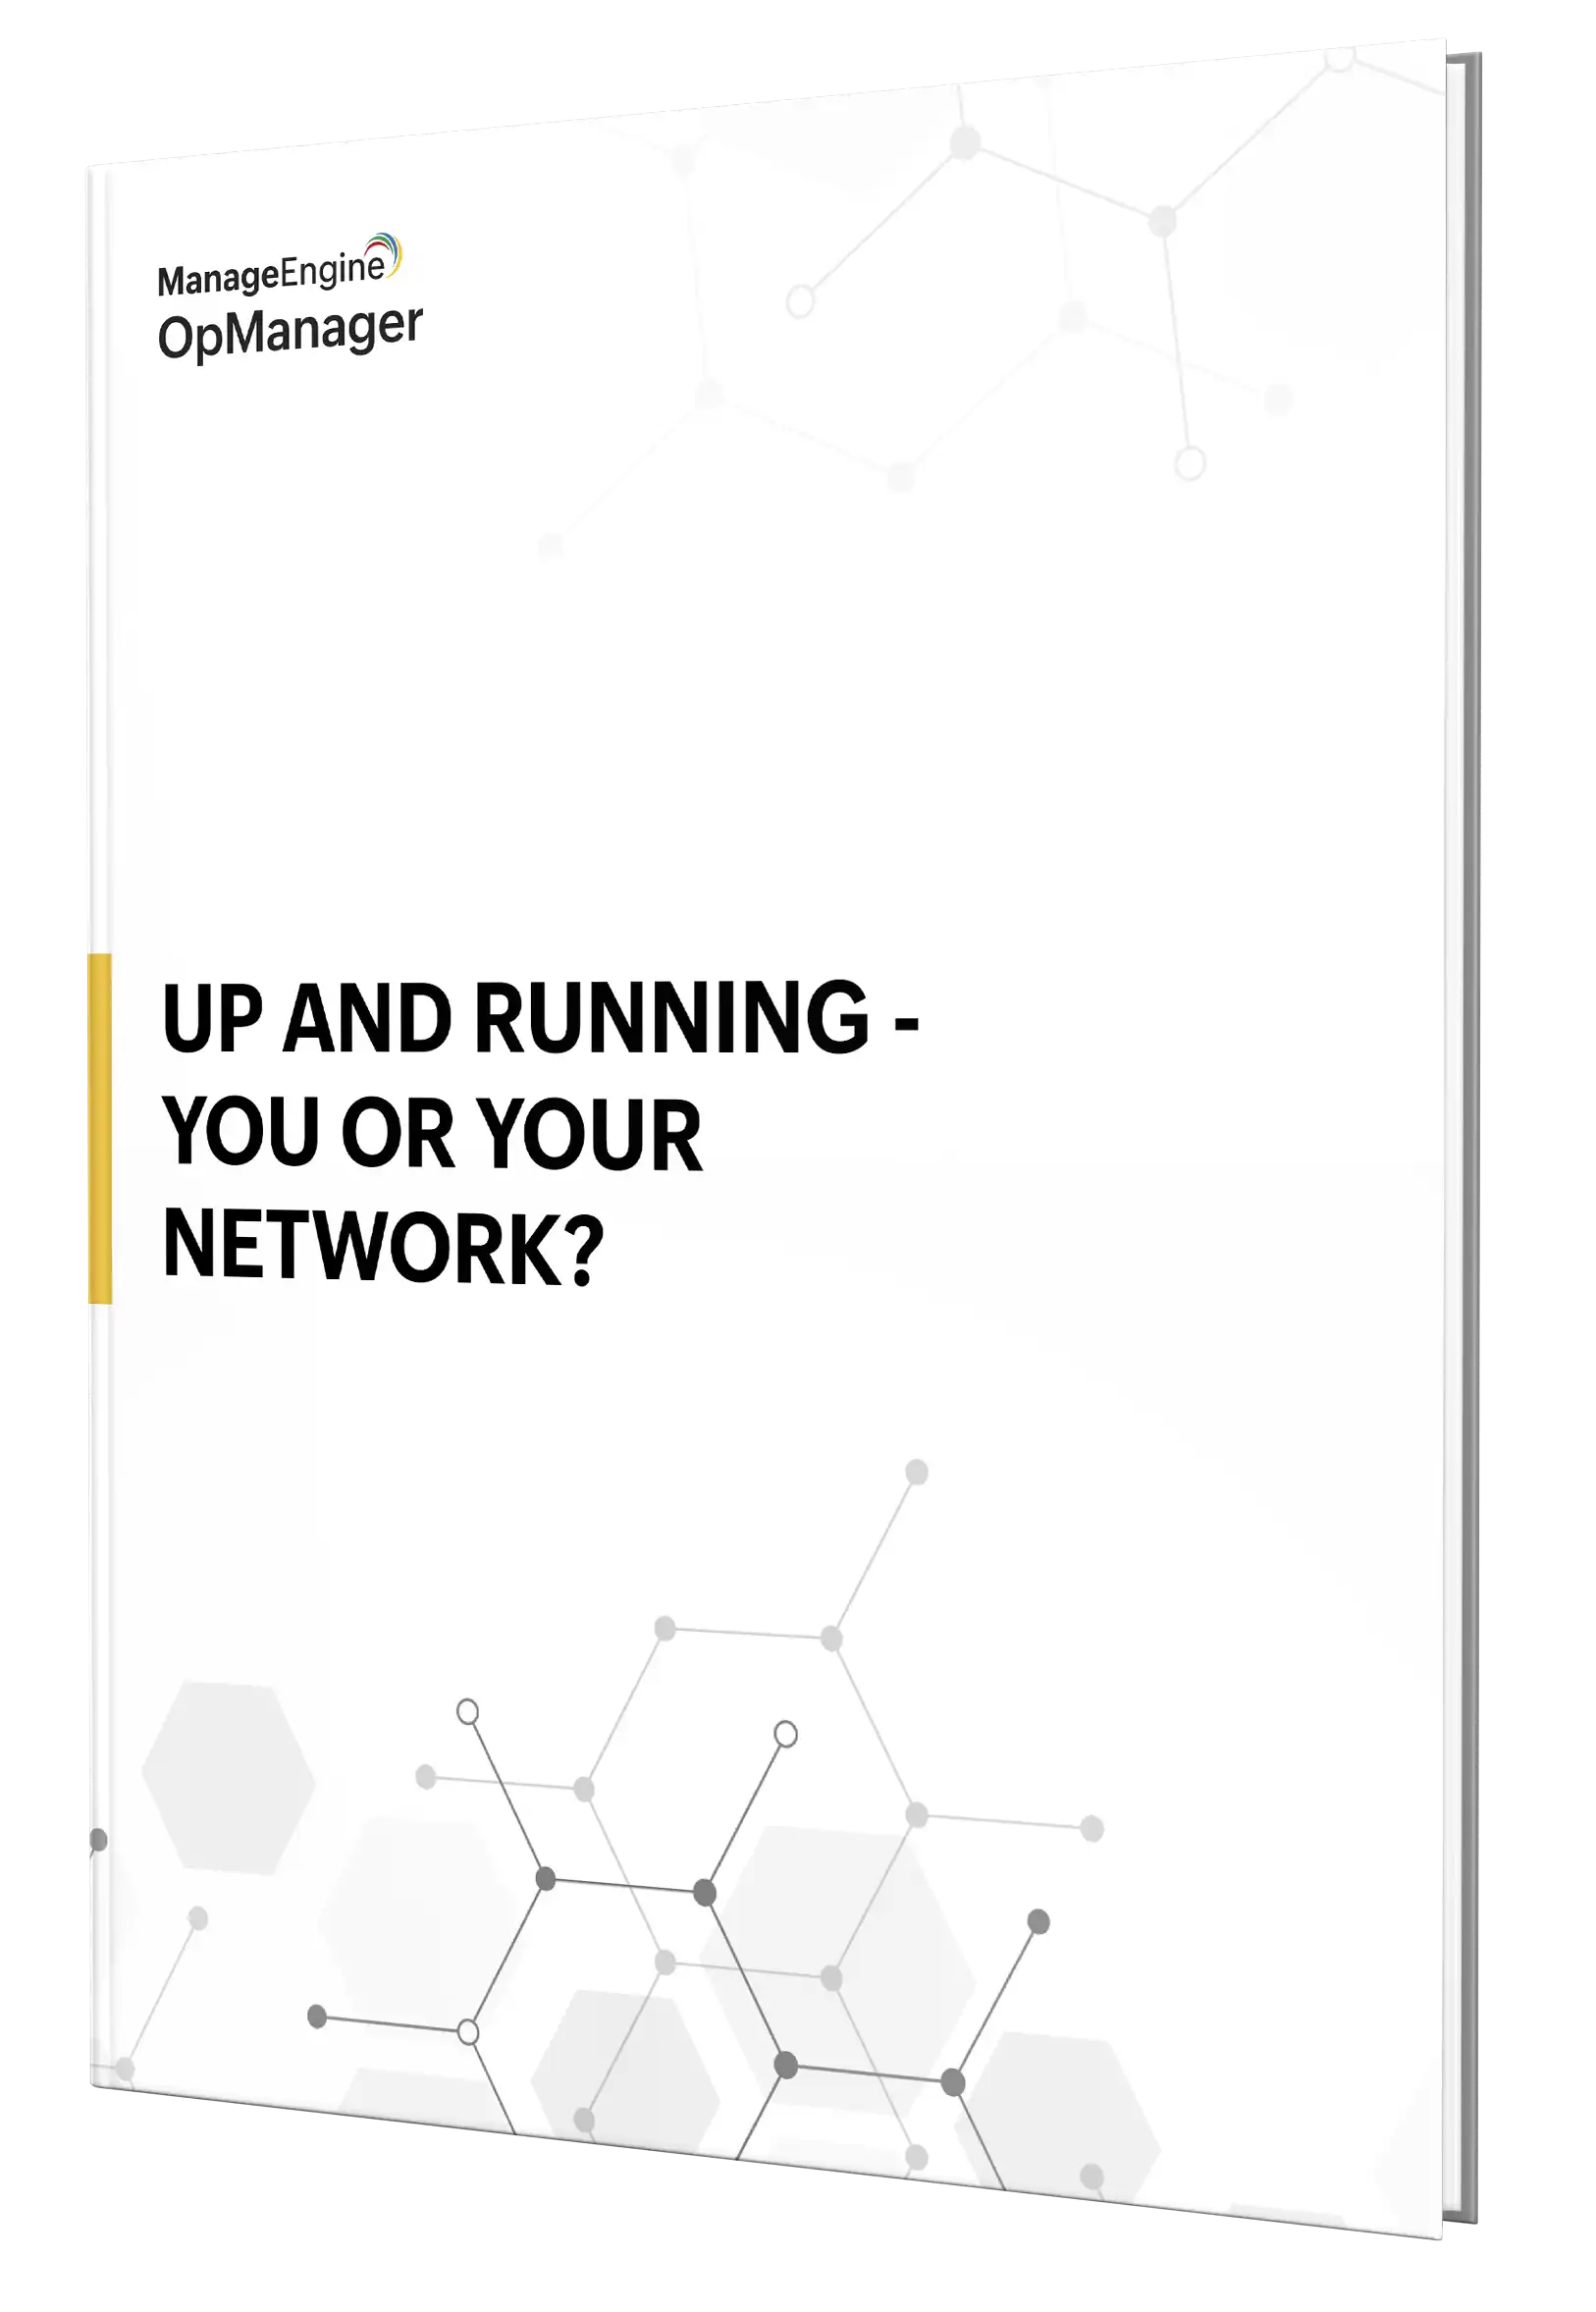 Up and Running - You or your network?